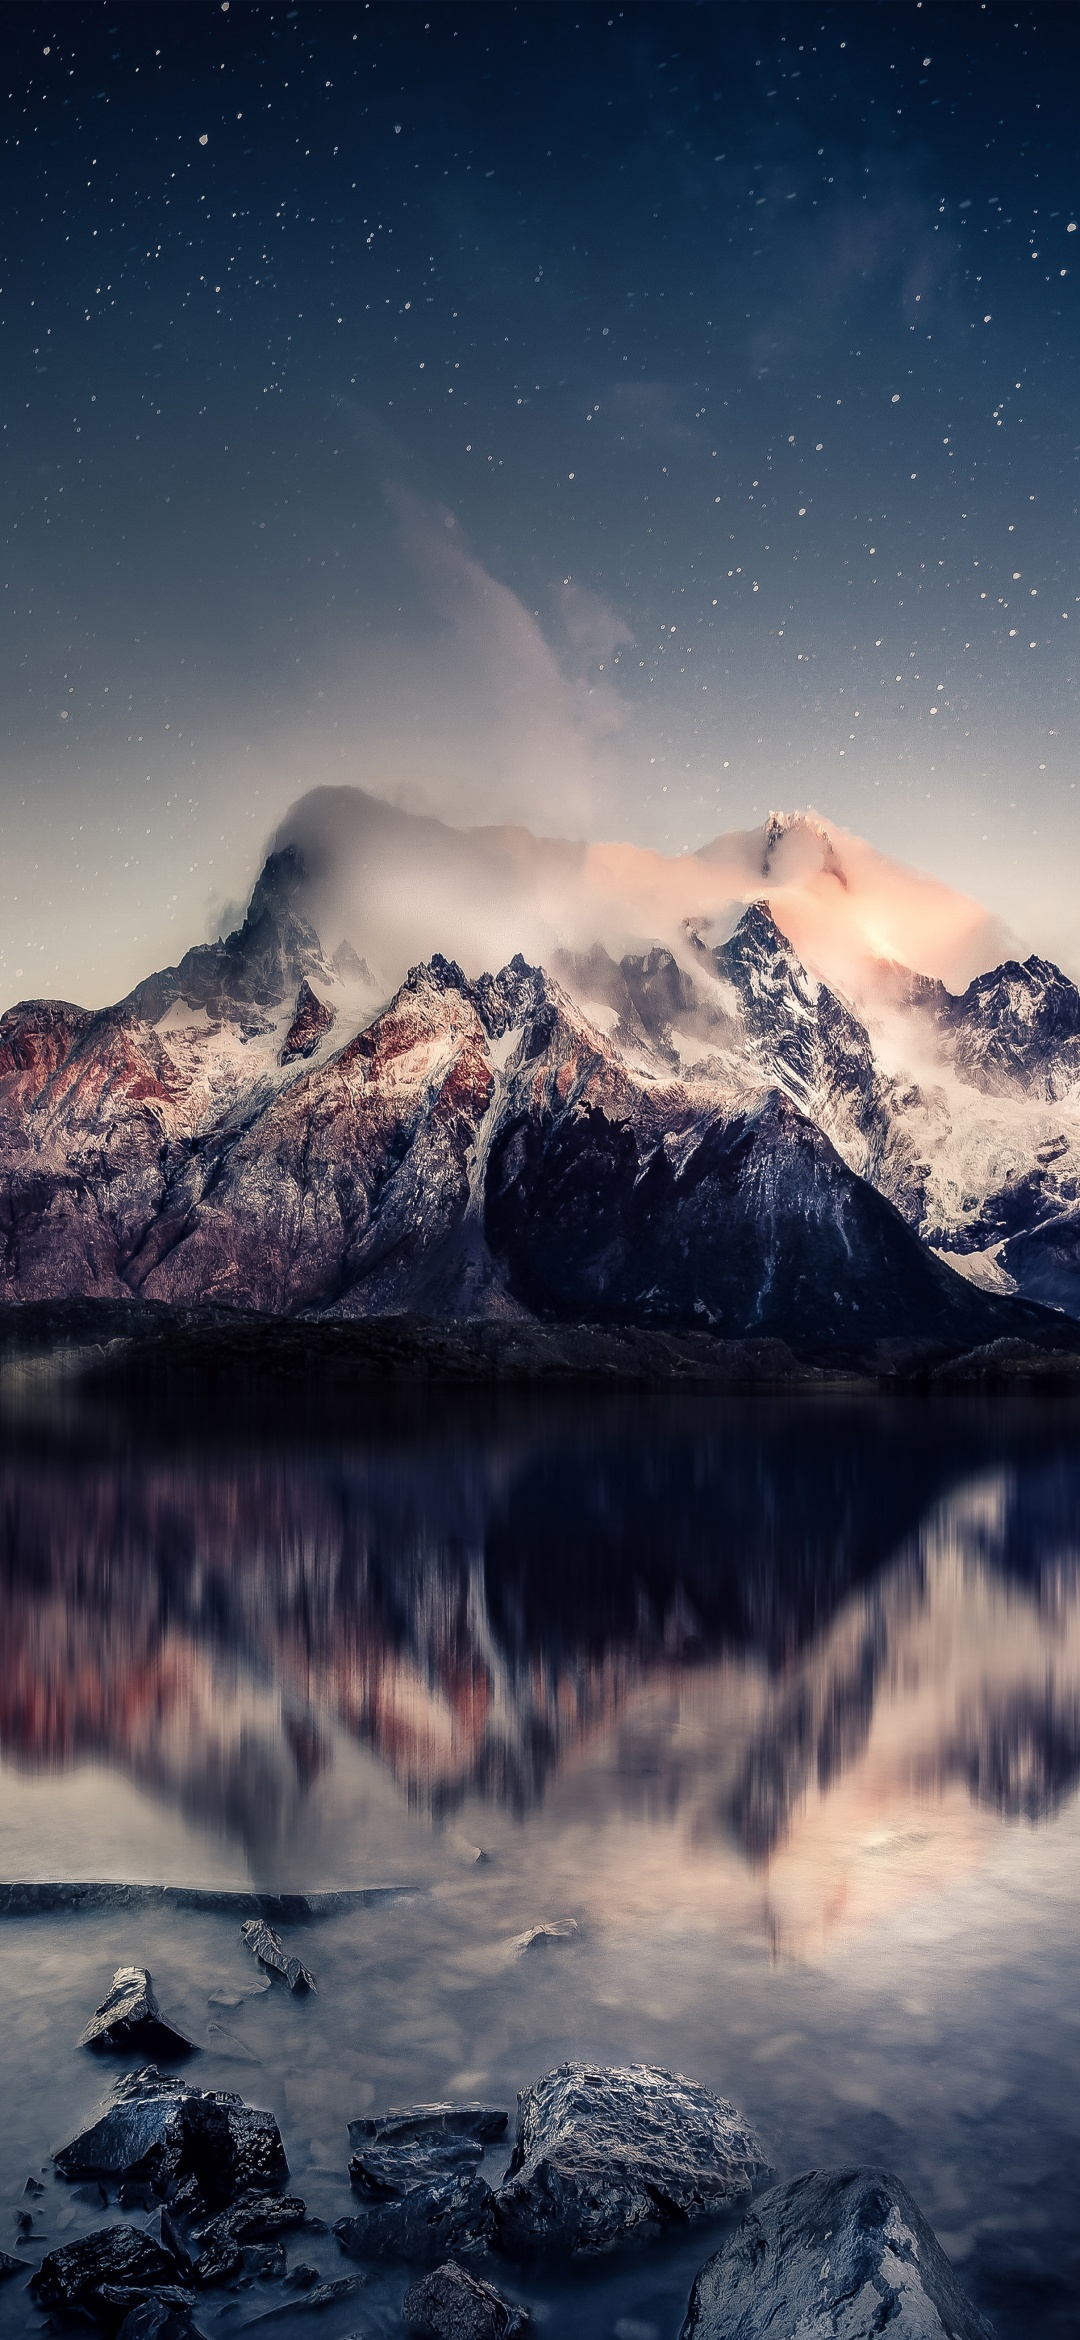 Mountains Wallpaper 4K, Reflection, Starry sky, Cold